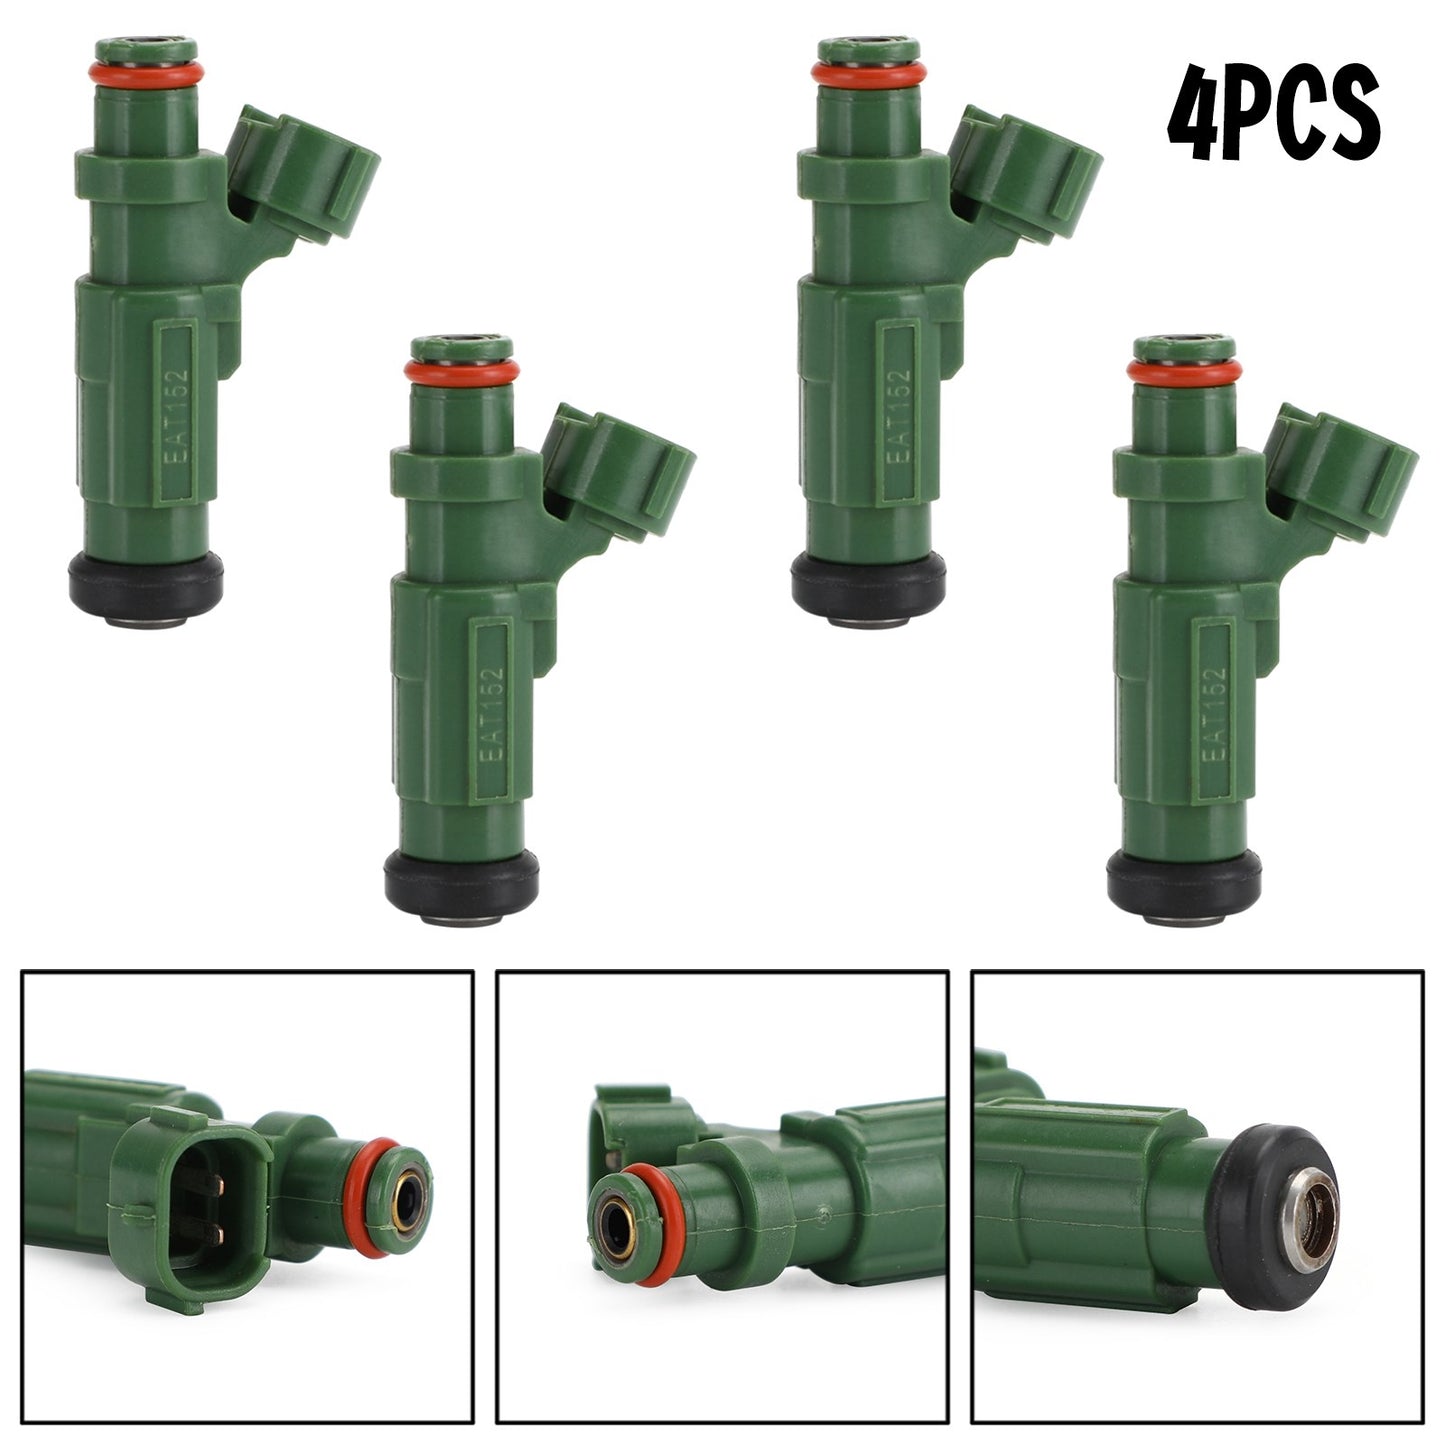 4pcs Fuel Injector 63P-13761-00-00 Für Yamaha F150 Outboard 2004-2013